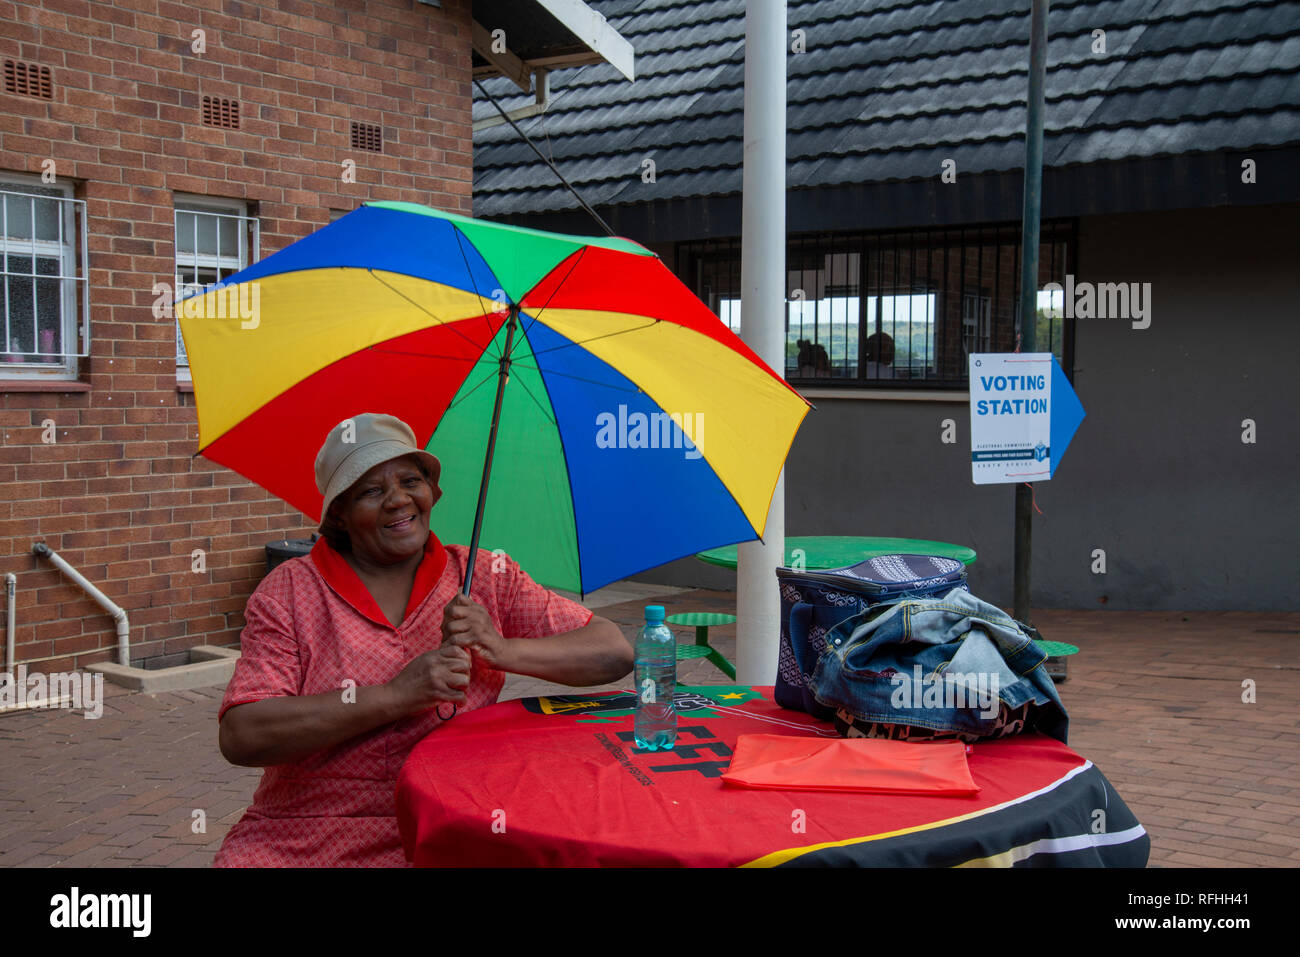 EFF party representative Jeannette Ntuane, 70, volunteers at a voter registration site in Linden, Johannesburg, Saturday afternoon. It's the final weekend to register to vote in South Africa's 2019 general elections. 'I think I have lost hope with the other parties. That's why I'm trying EFF. Maybe it will bring change,' said the retired domestic worker. Ntuane said she is tired of corruption. 'The civil servants are getting so much money and they are still stealing from the government. When you work (as a domestic), you get so little.' Credit: Eva-Lotta Jansson/Alamy Live News Stock Photo